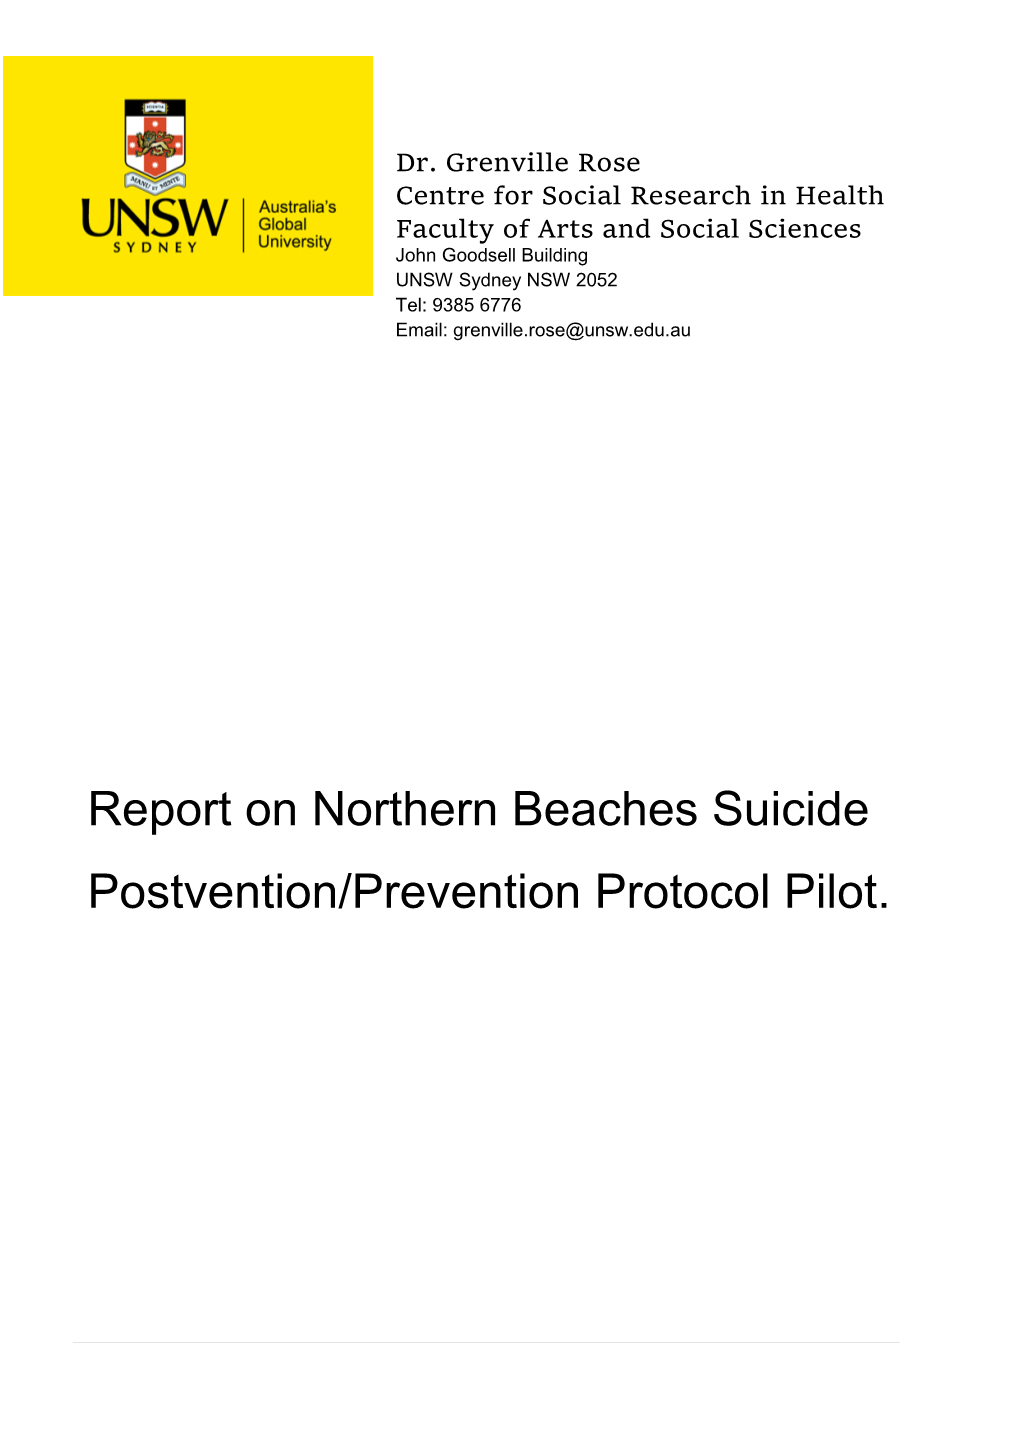 Report on Northern Beaches Suicide Postvention/Prevention Protocol Pilot